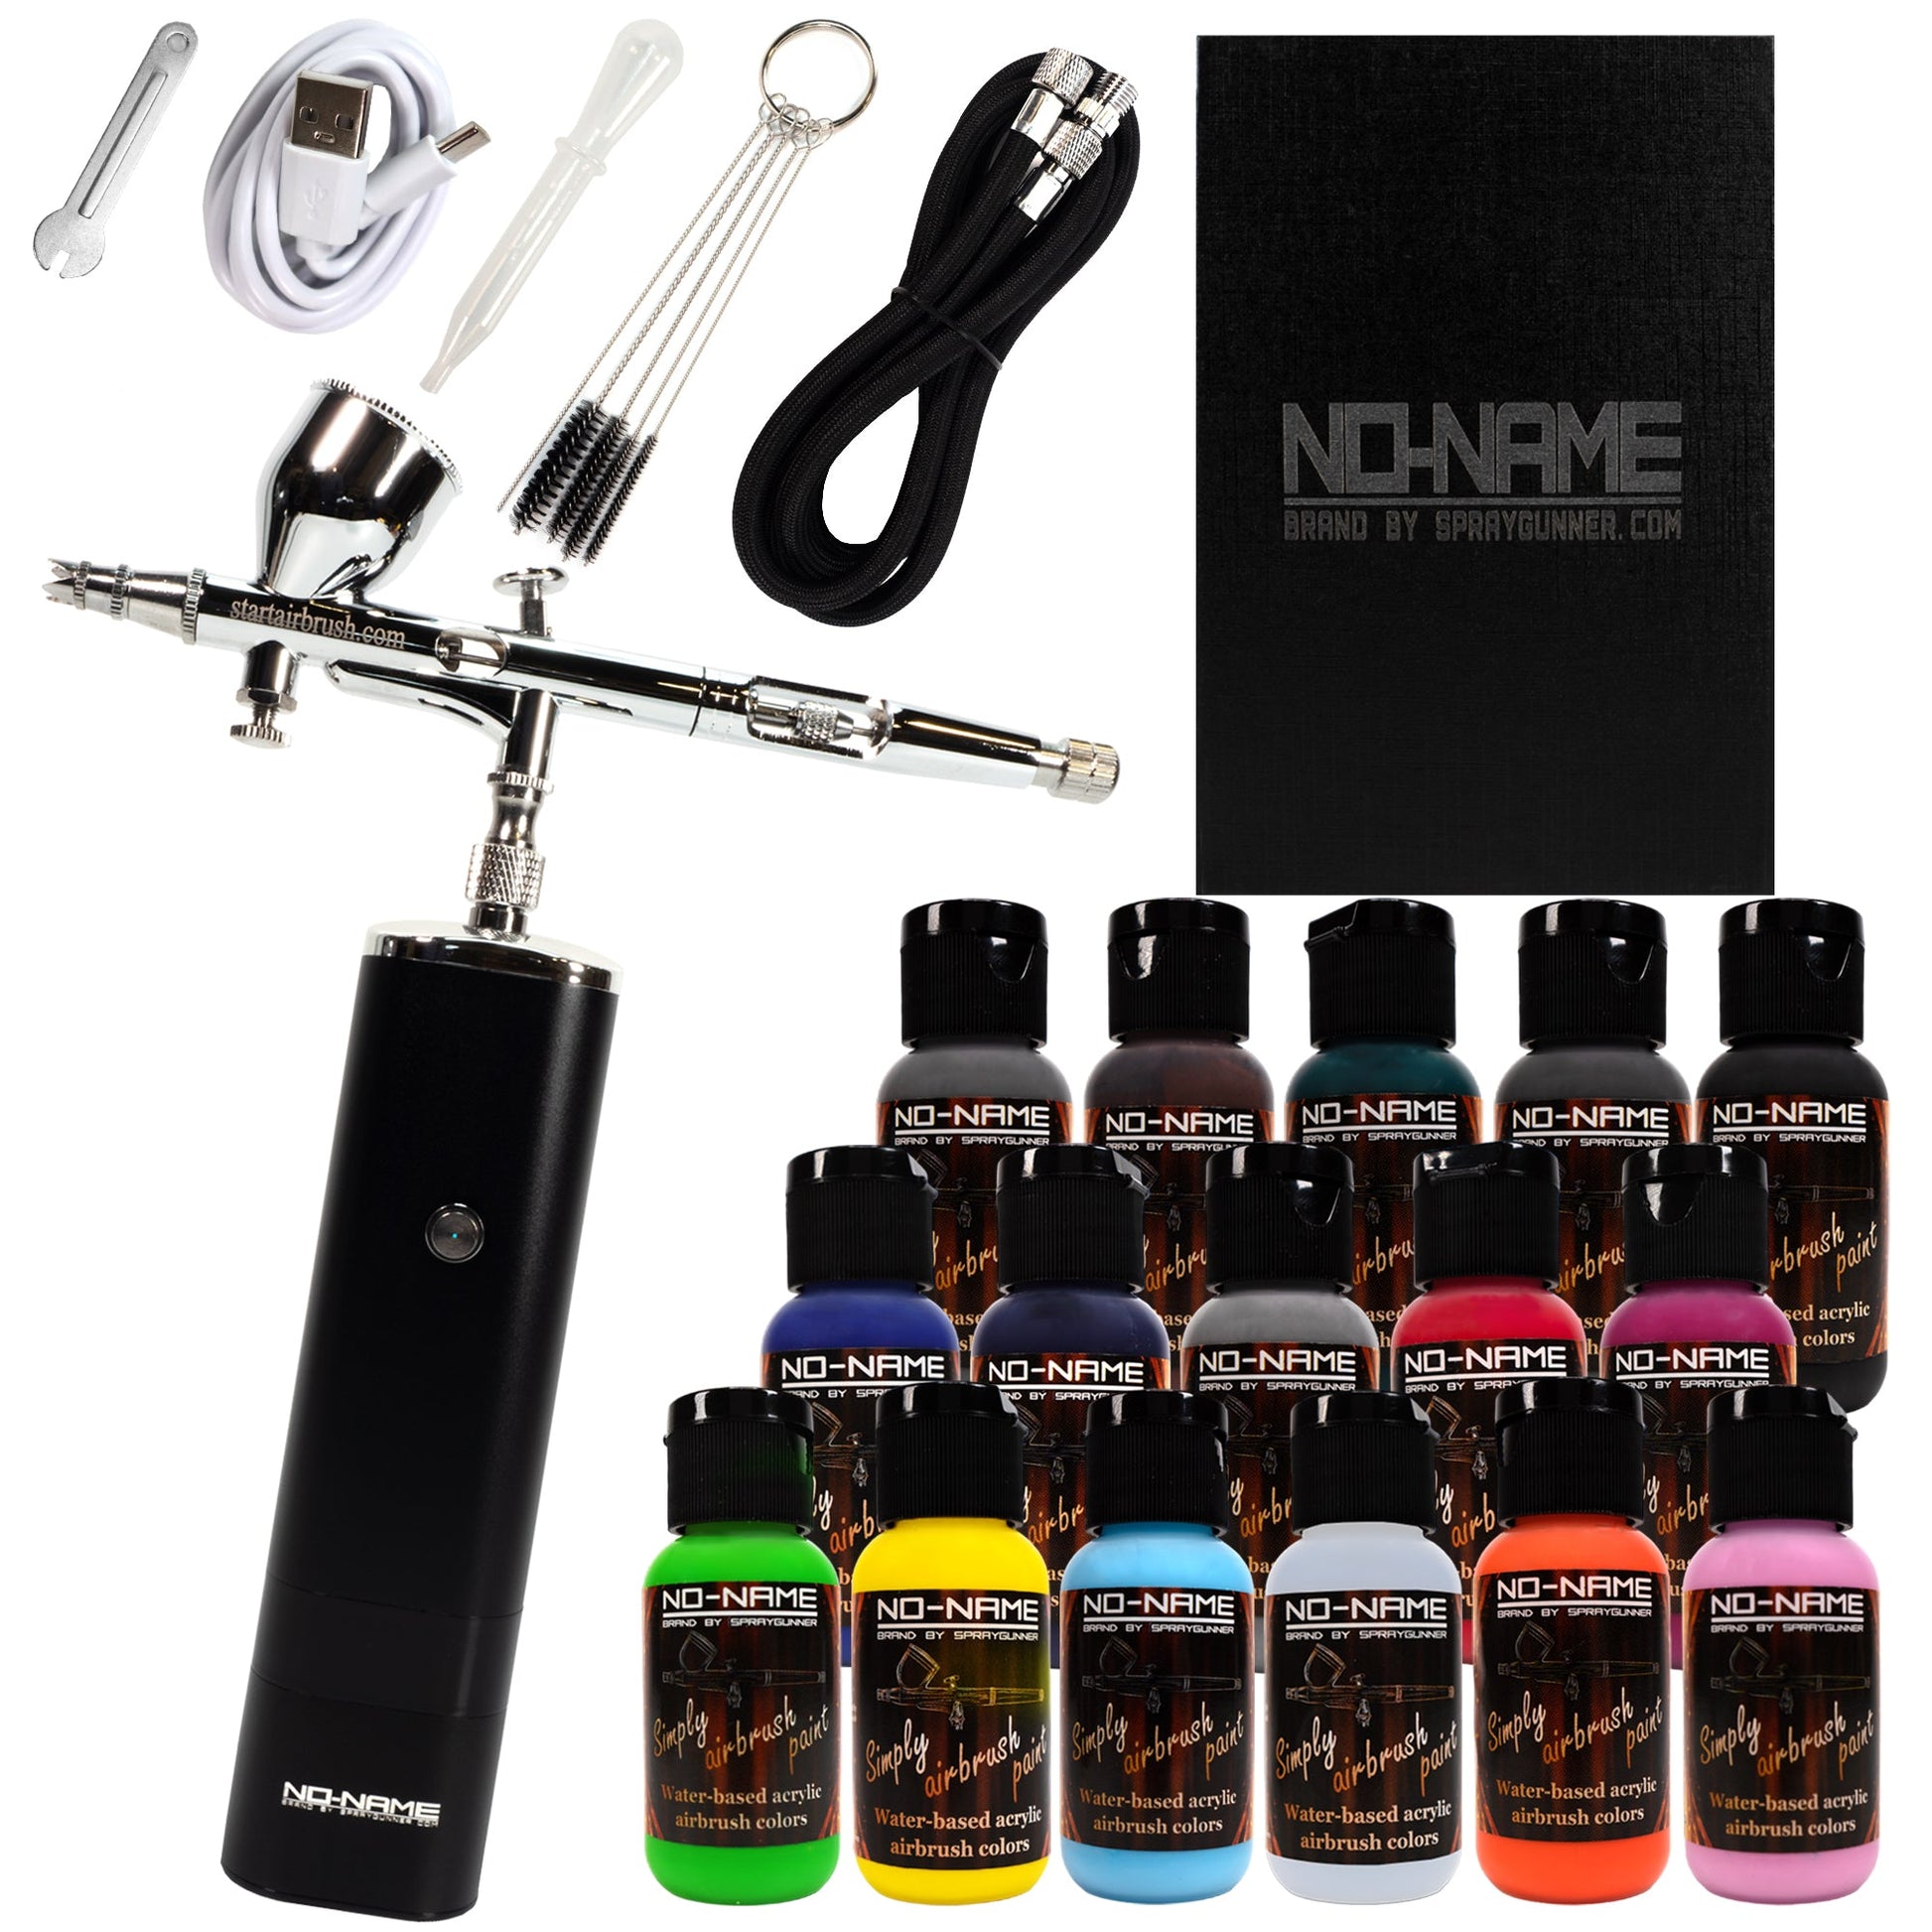 Beginner Cordless Airbrush Kit with Compressor & Acrylic Airbrush Paints by NO-NAME Brand NO-NAME brand